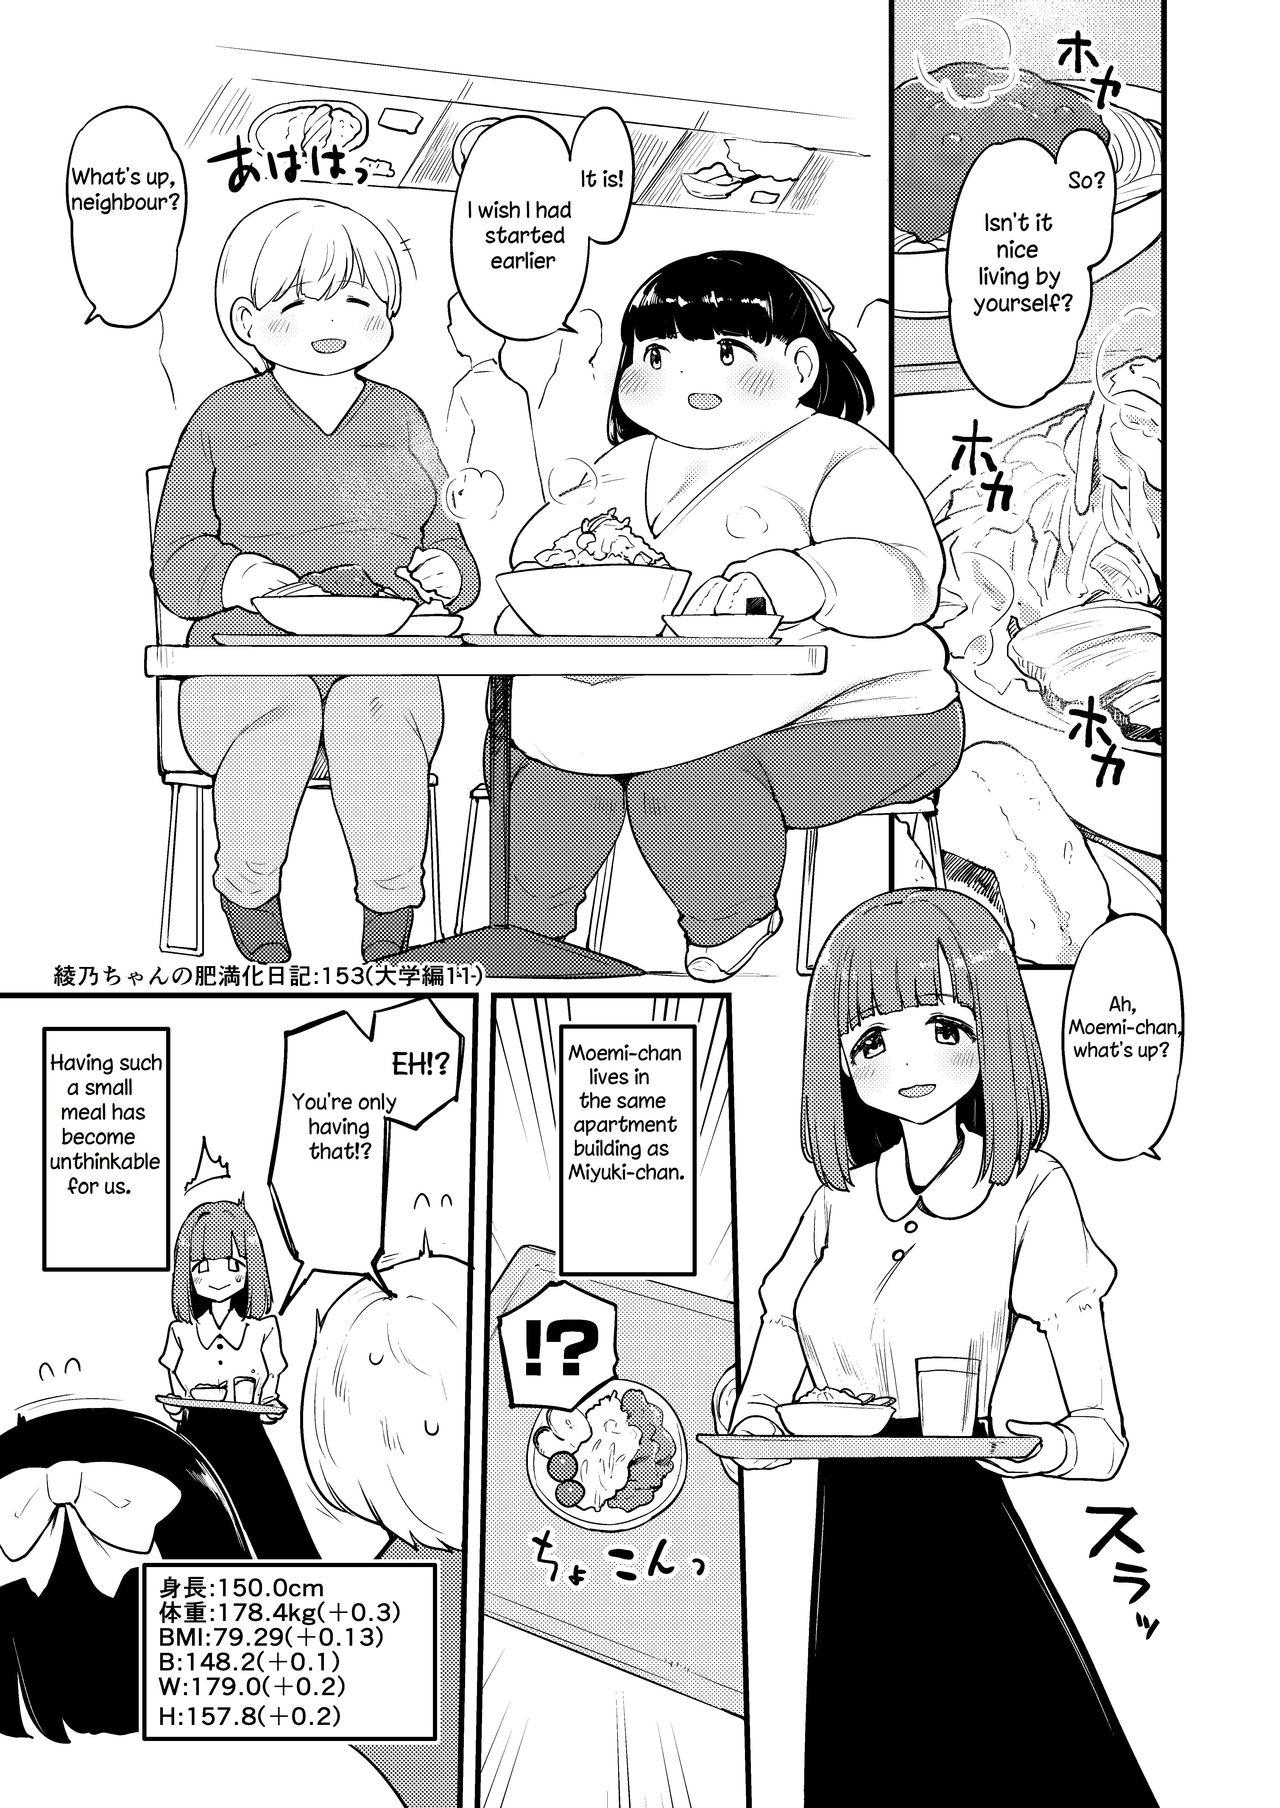 Ayano's Weight Gain Diary [English] Torrent(181 pages) 152